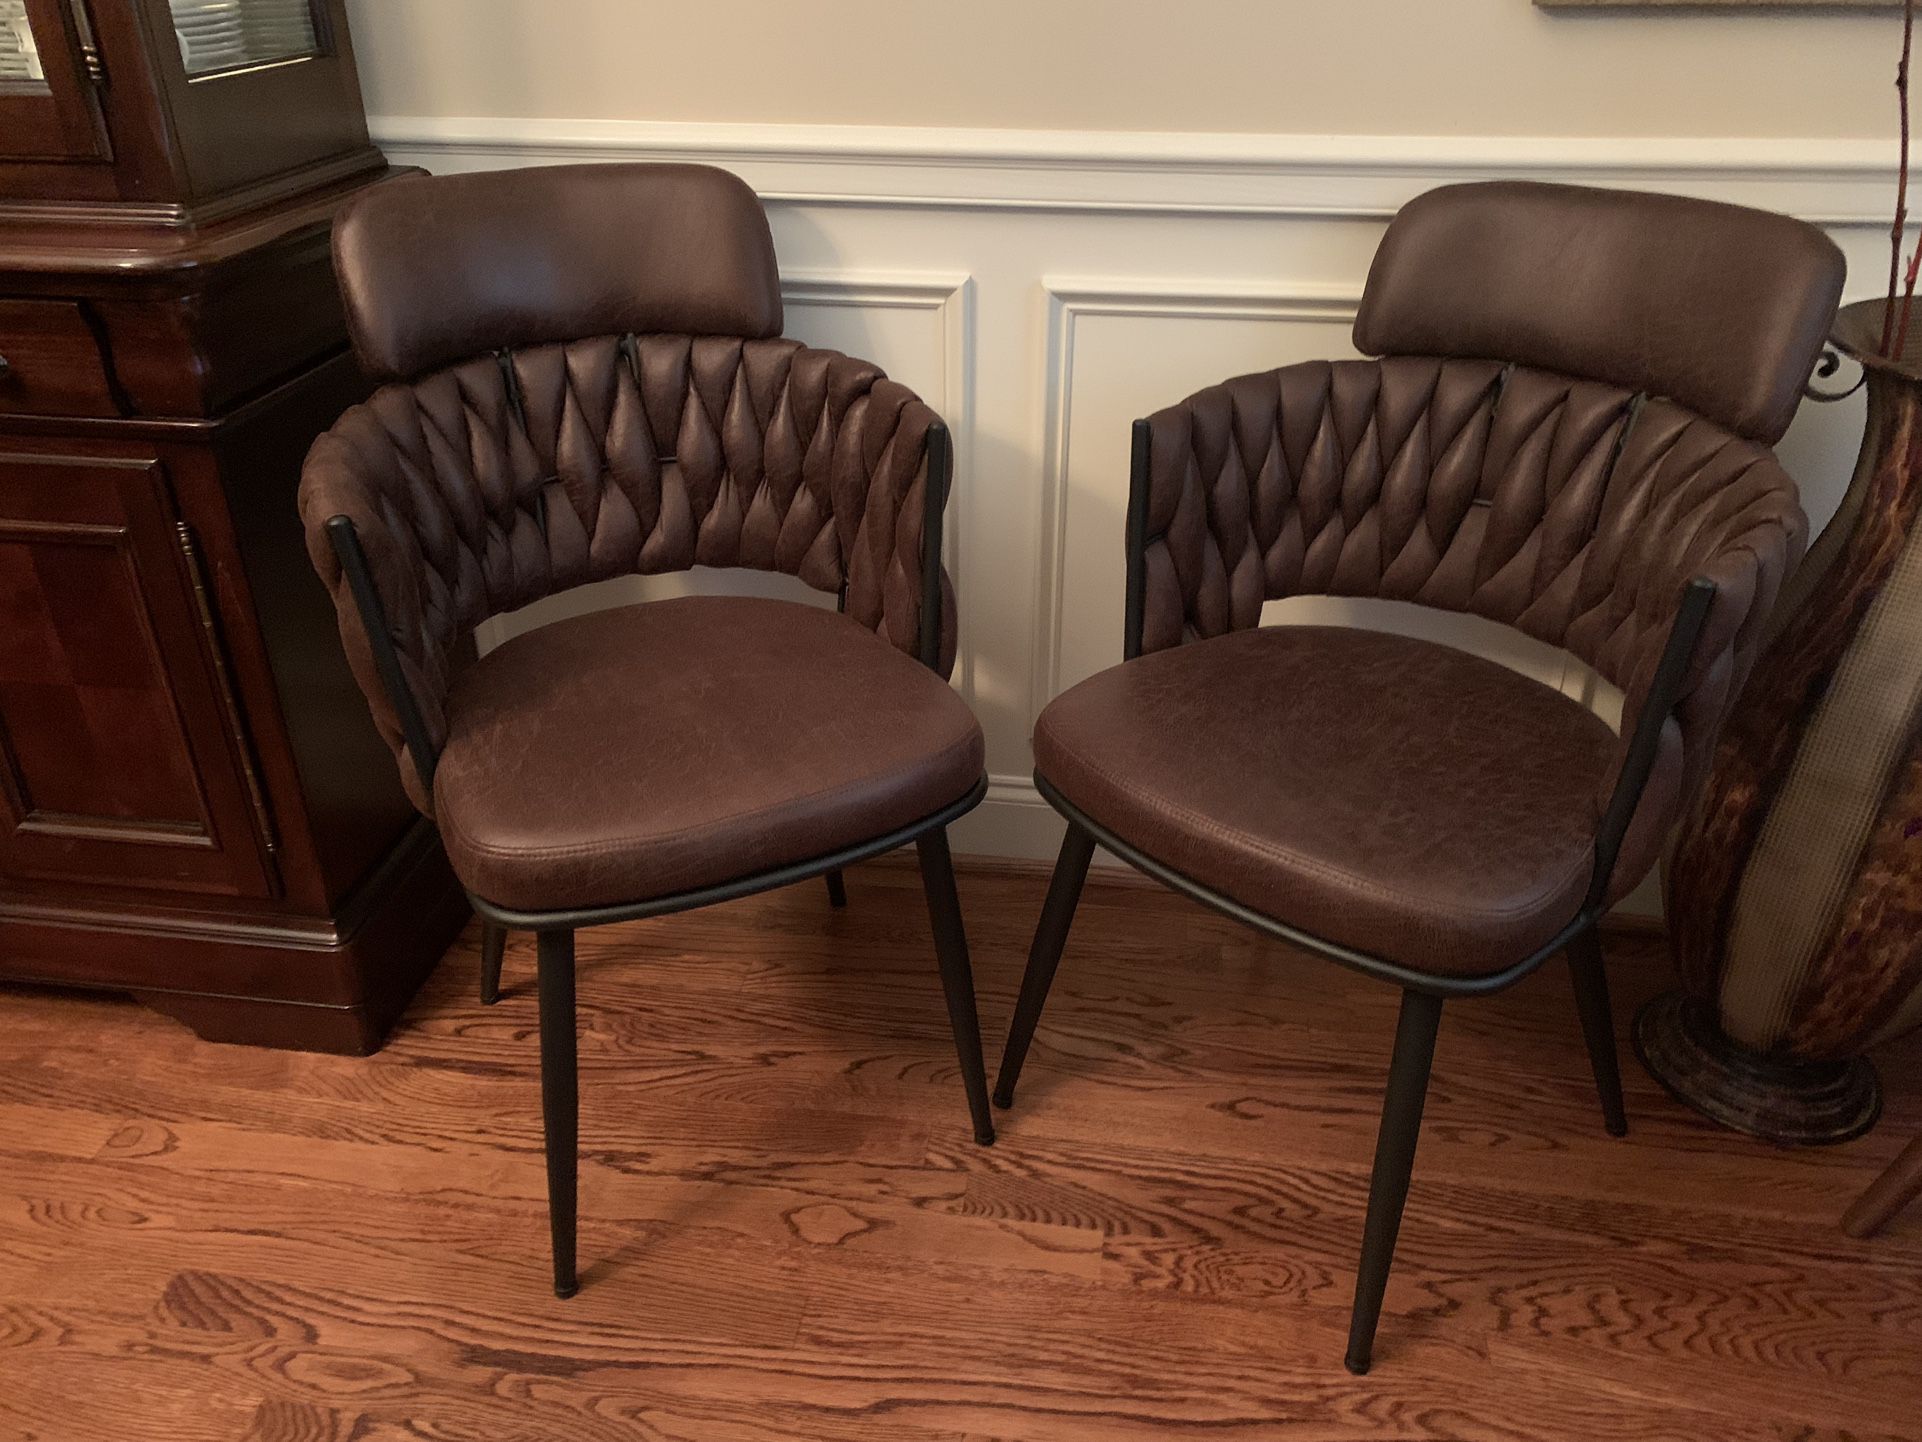 Dark Brown Upholstered Chairs